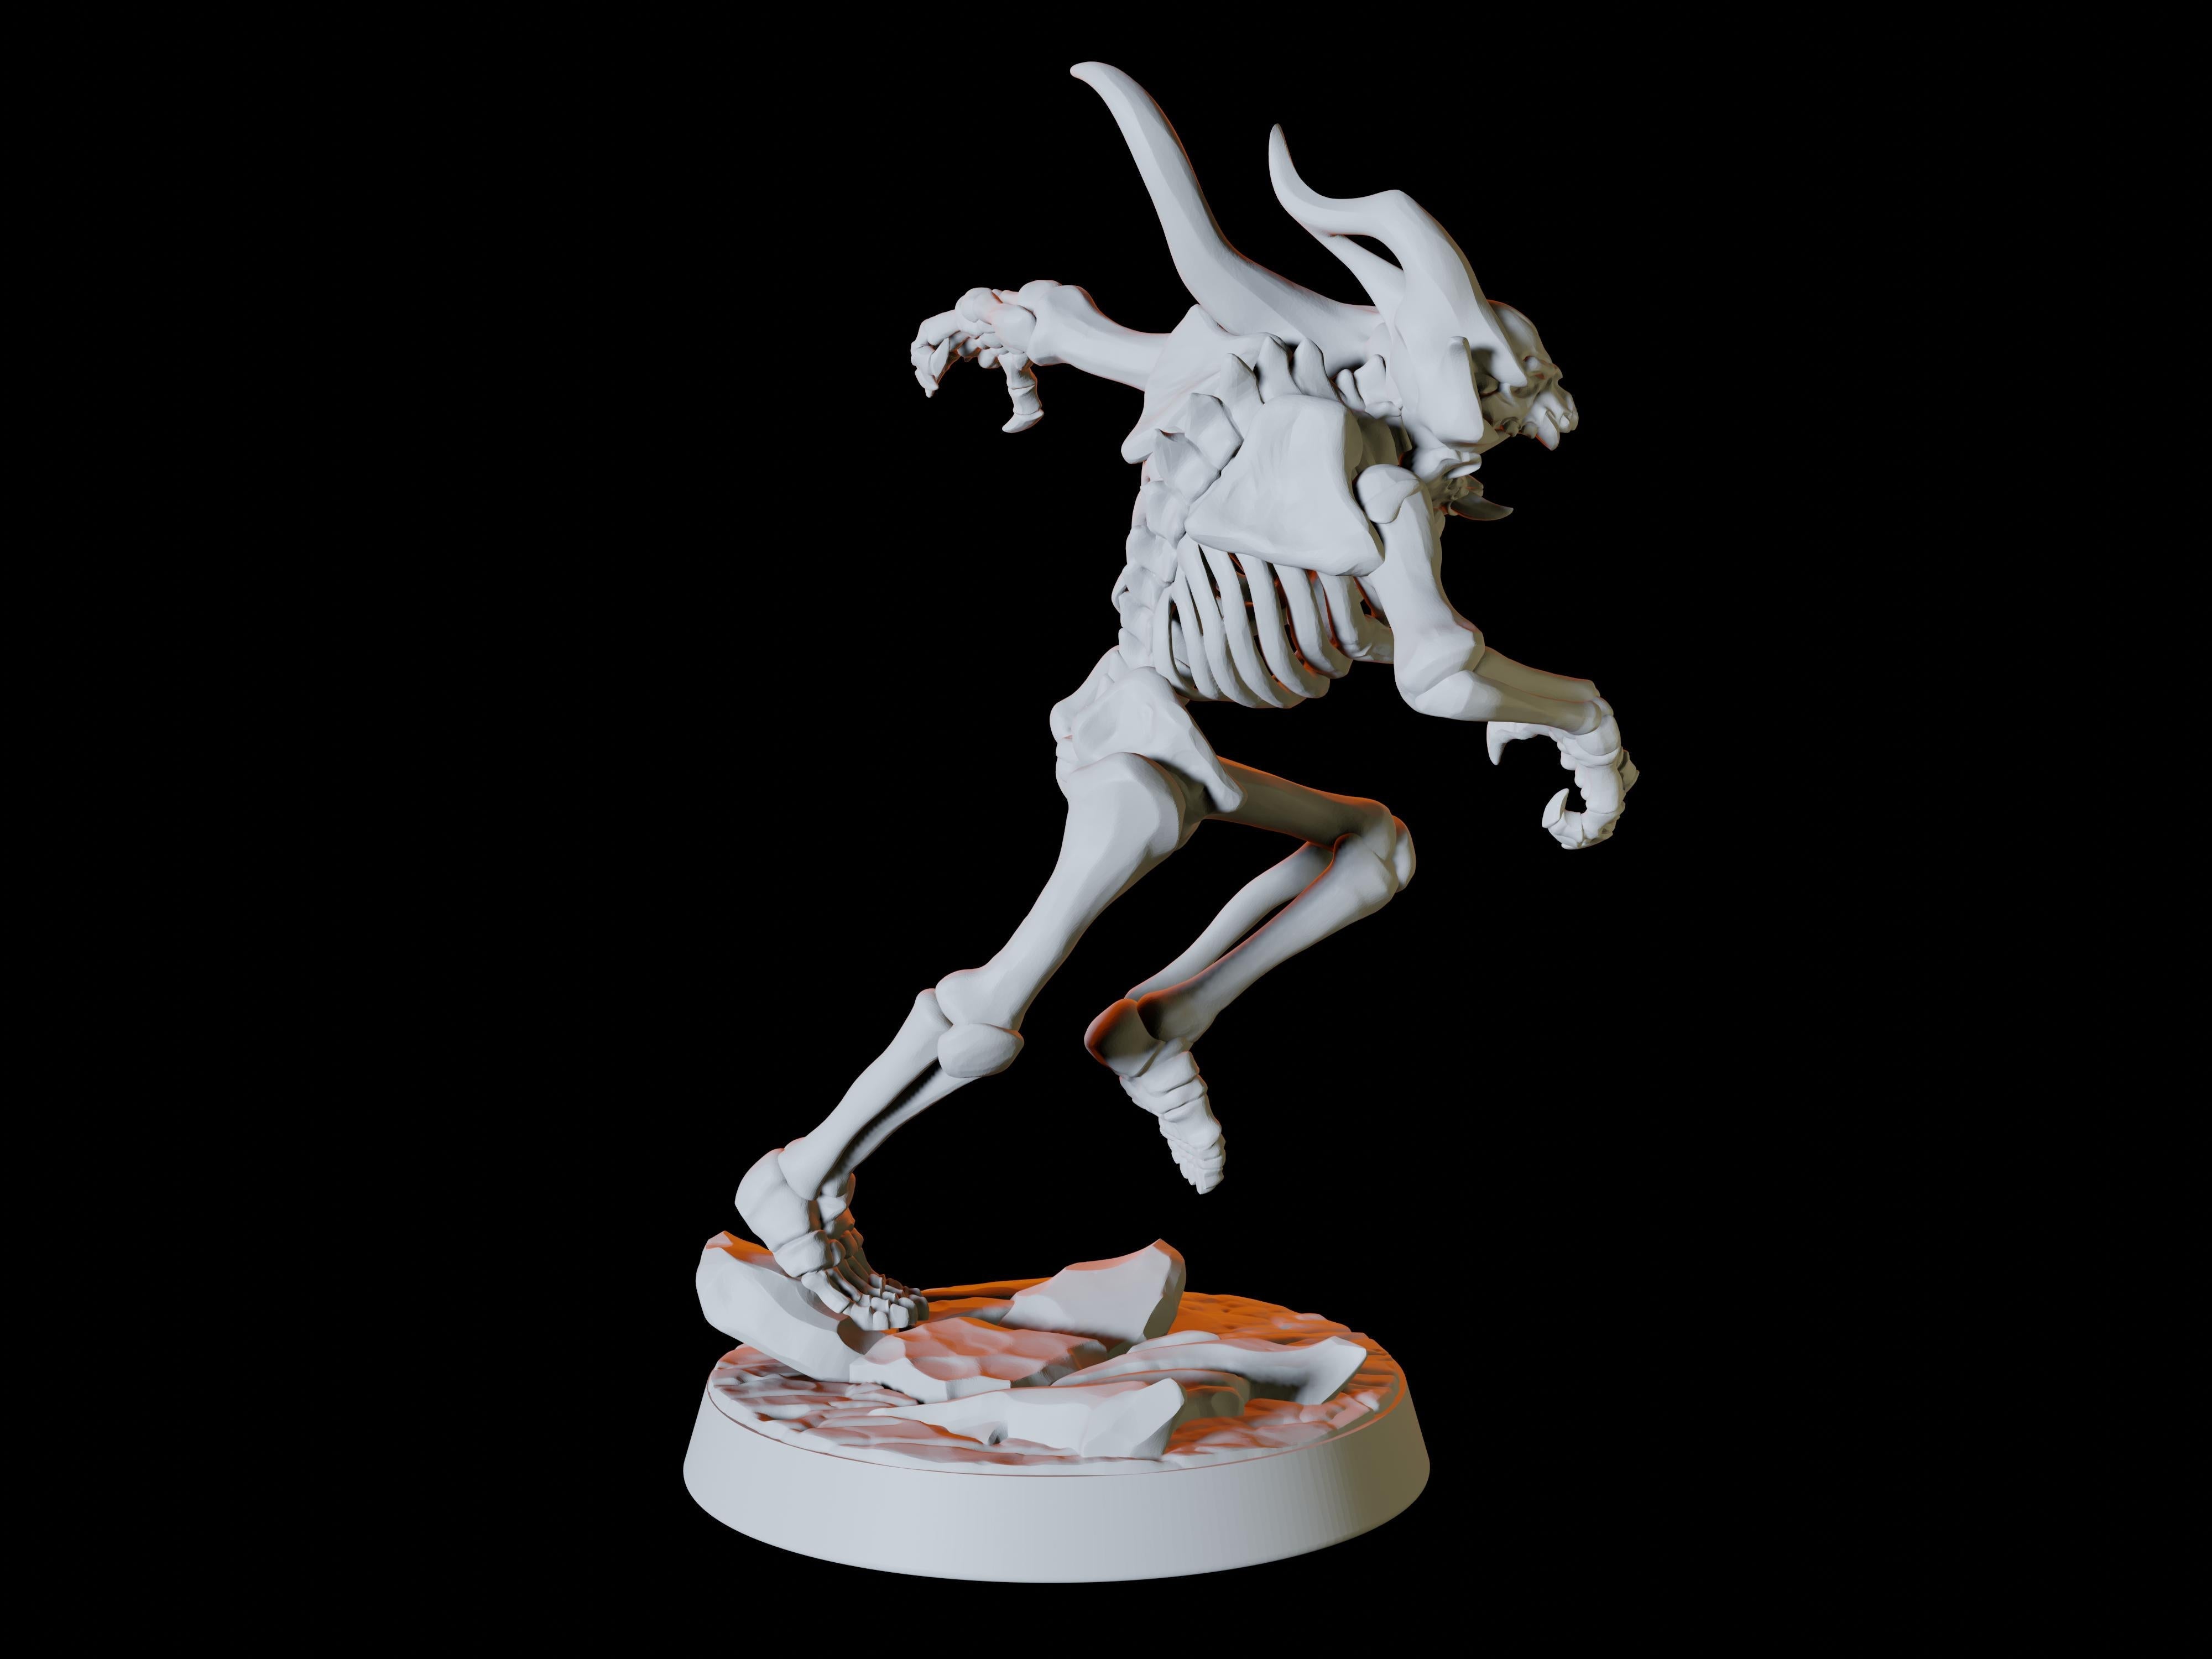 Orc Skeletons Miniature for Dungeons and Dragons - Myth Forged